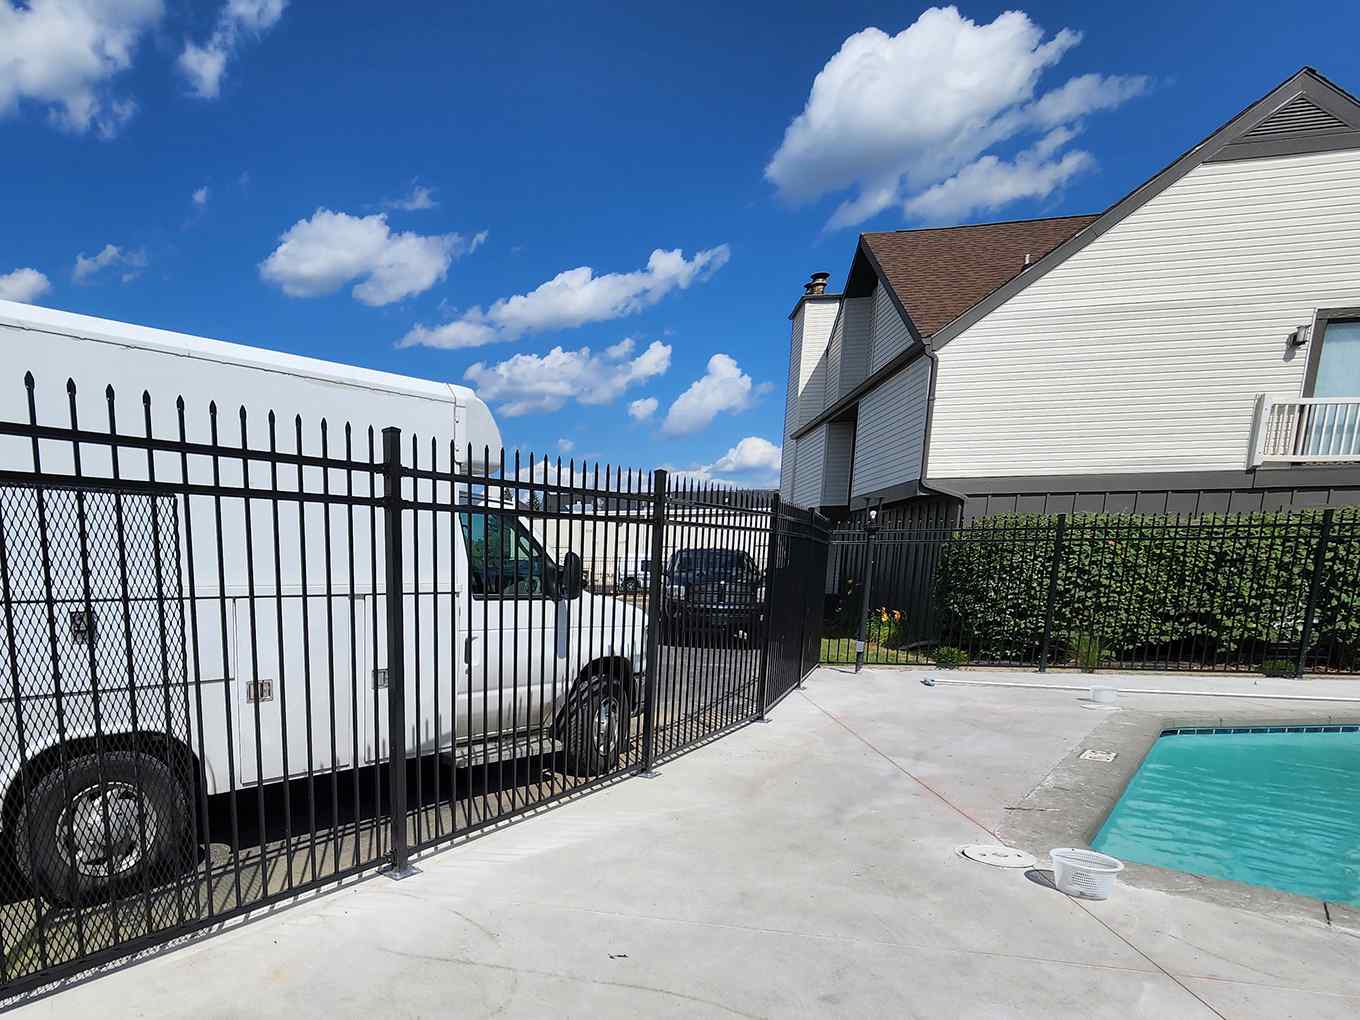 Commercial wrought iron Indianapolis, Indiana fence company